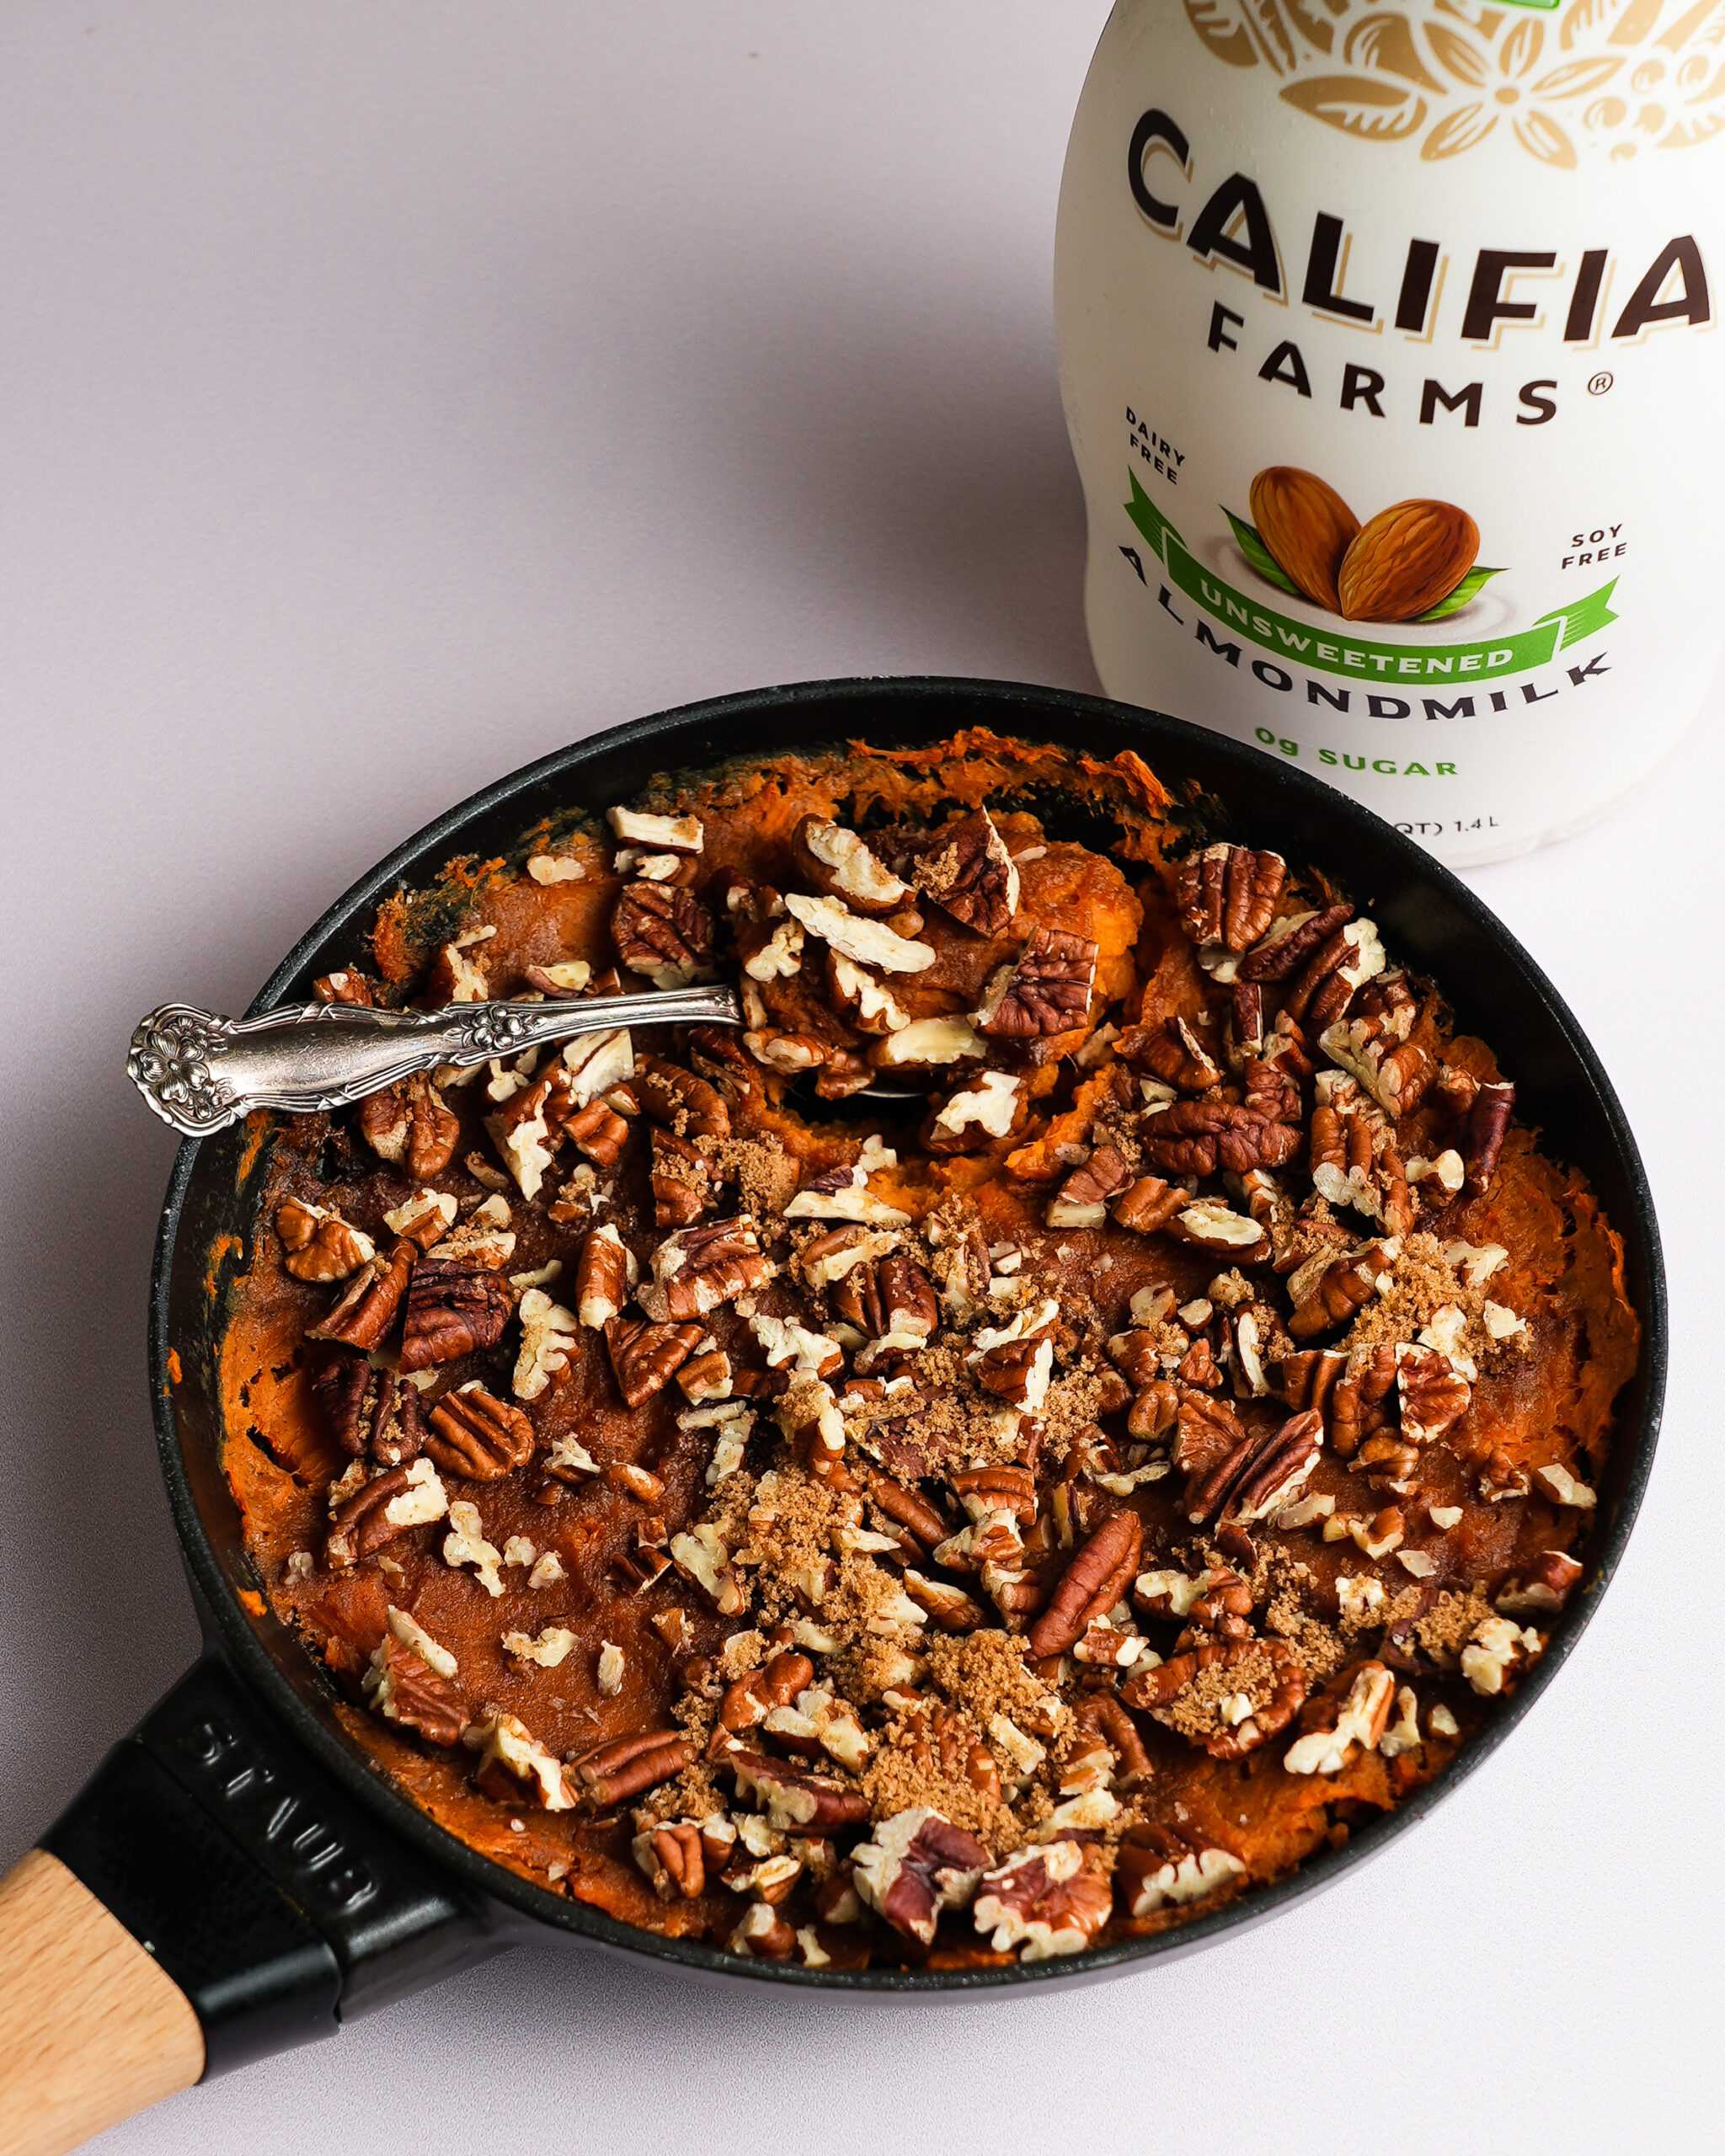 Sweet potato casserole topped with pecans sits at the foreground of the image, with Califia Farms Unsweetened Almondmilk behind.